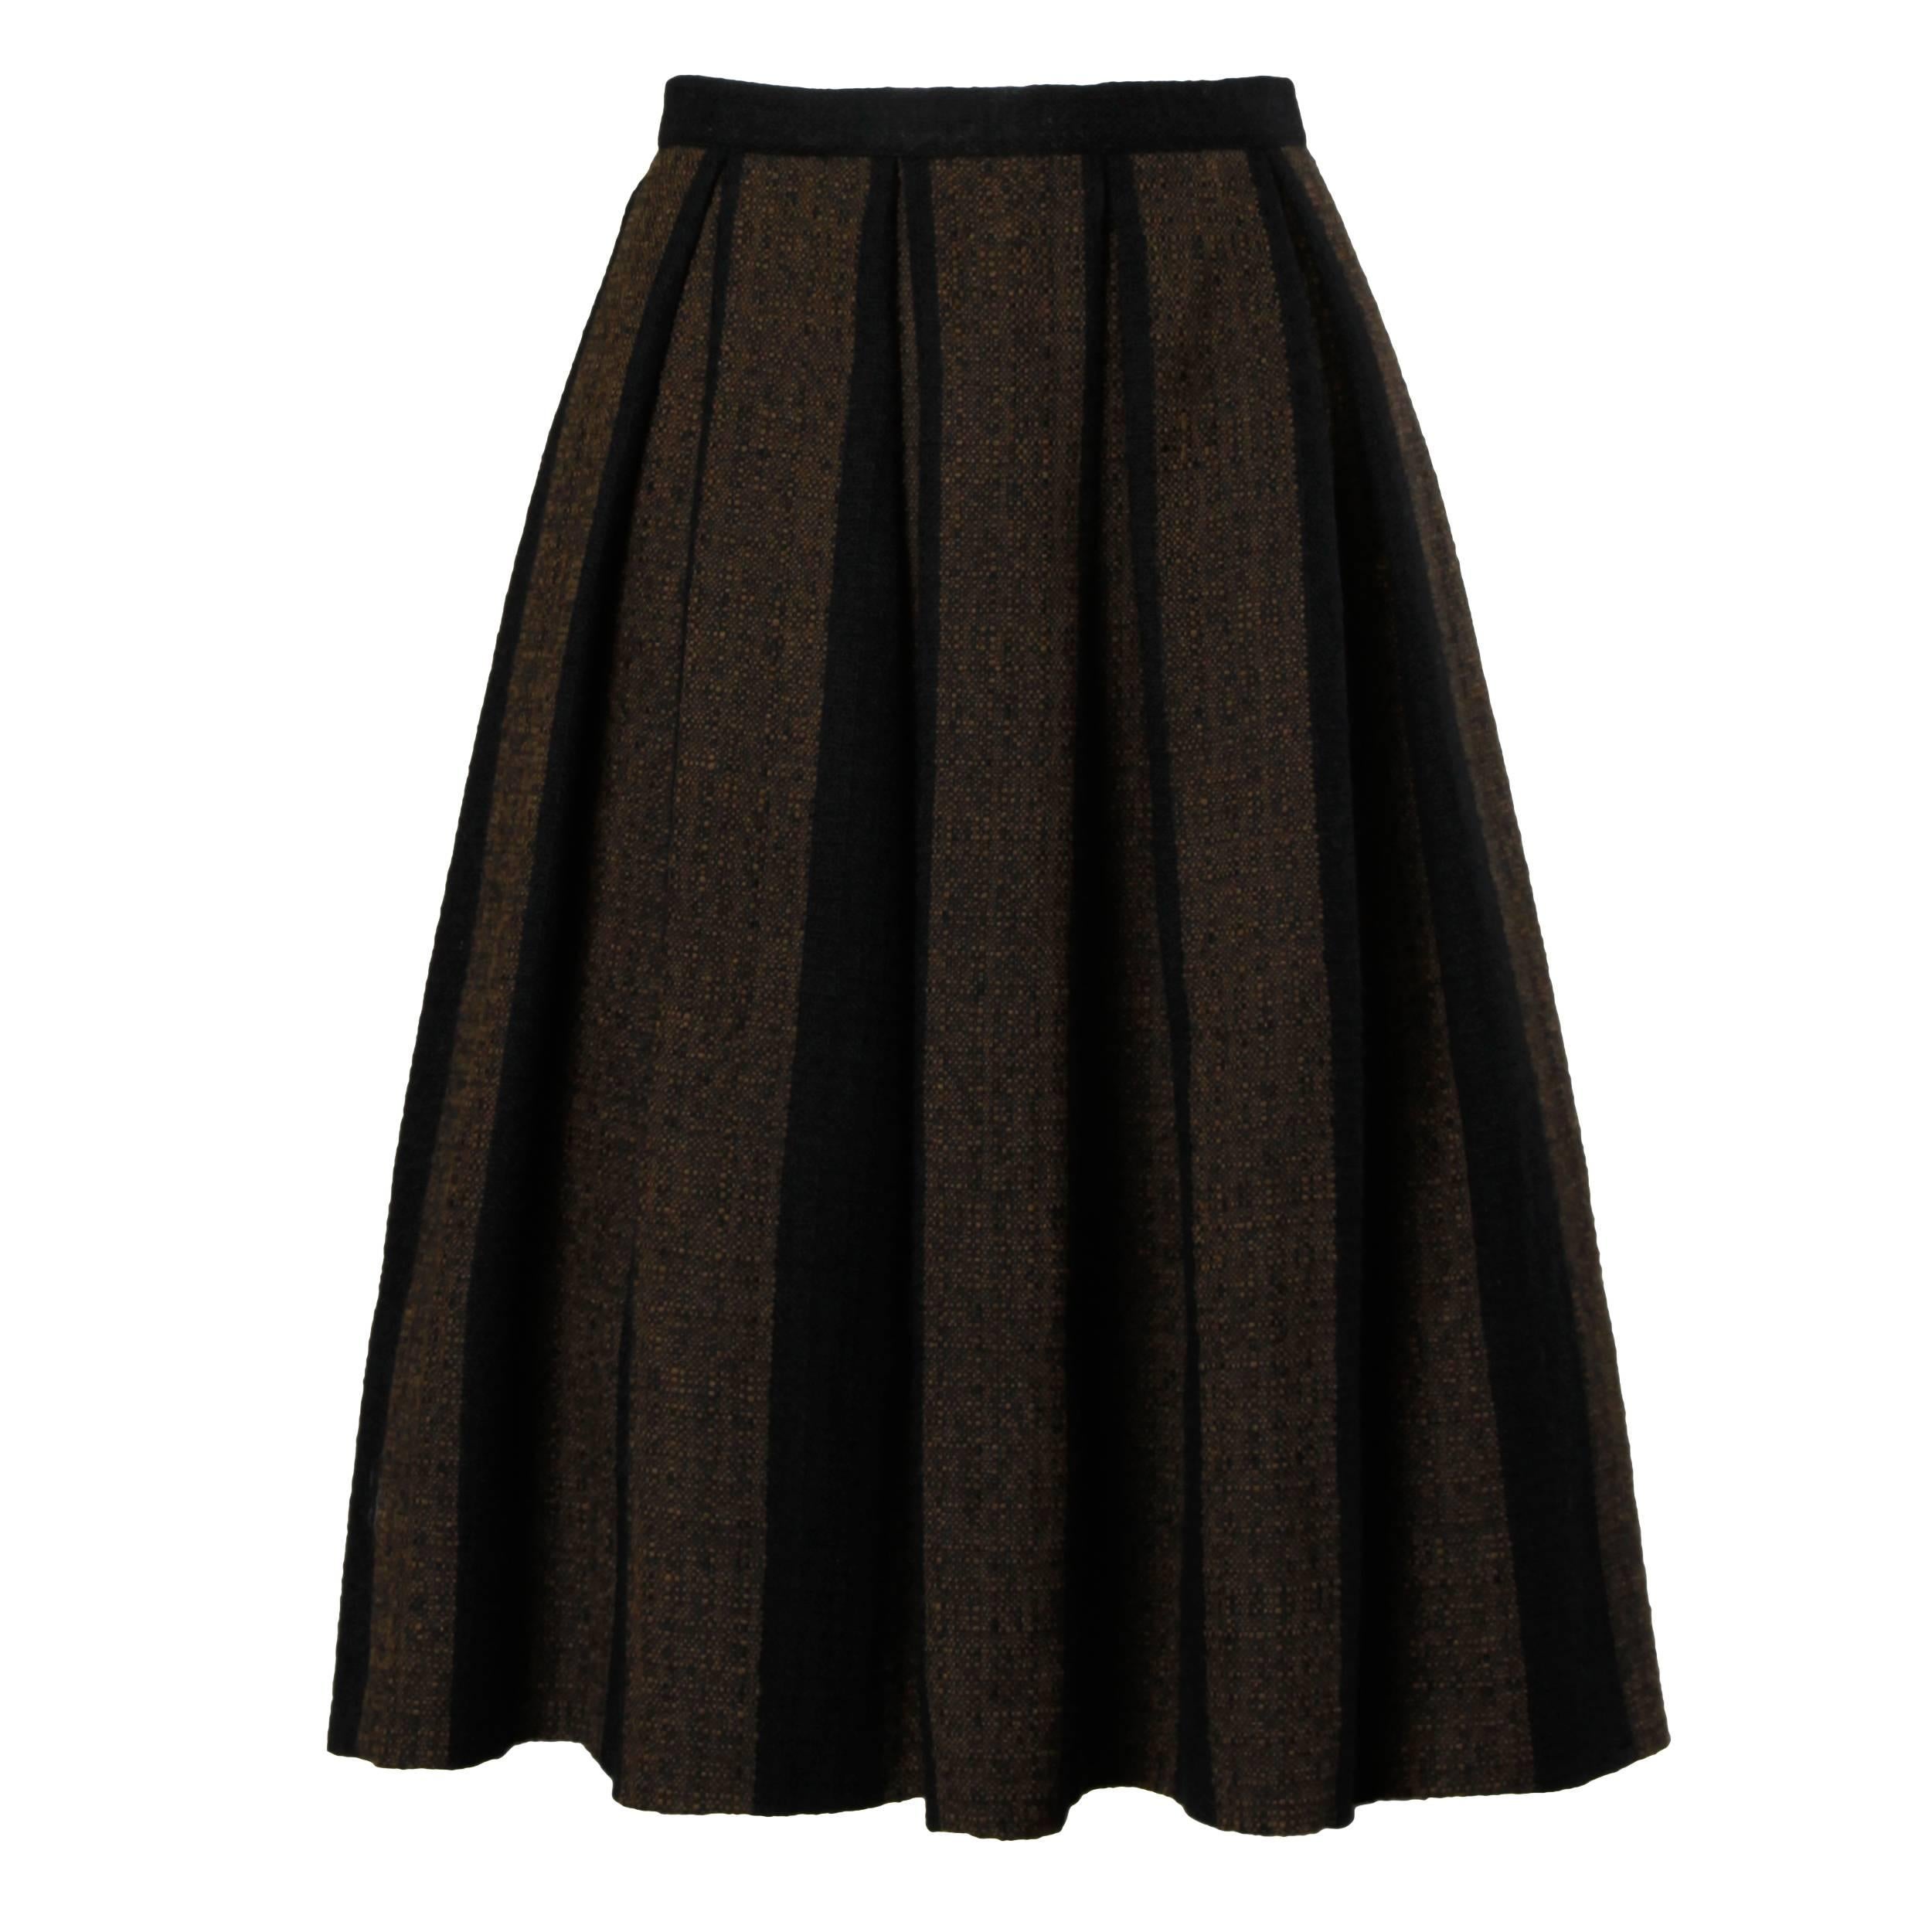 1960s Vintage Brown + Black Soft Woven Wool Skirt with Box Pleats For Sale